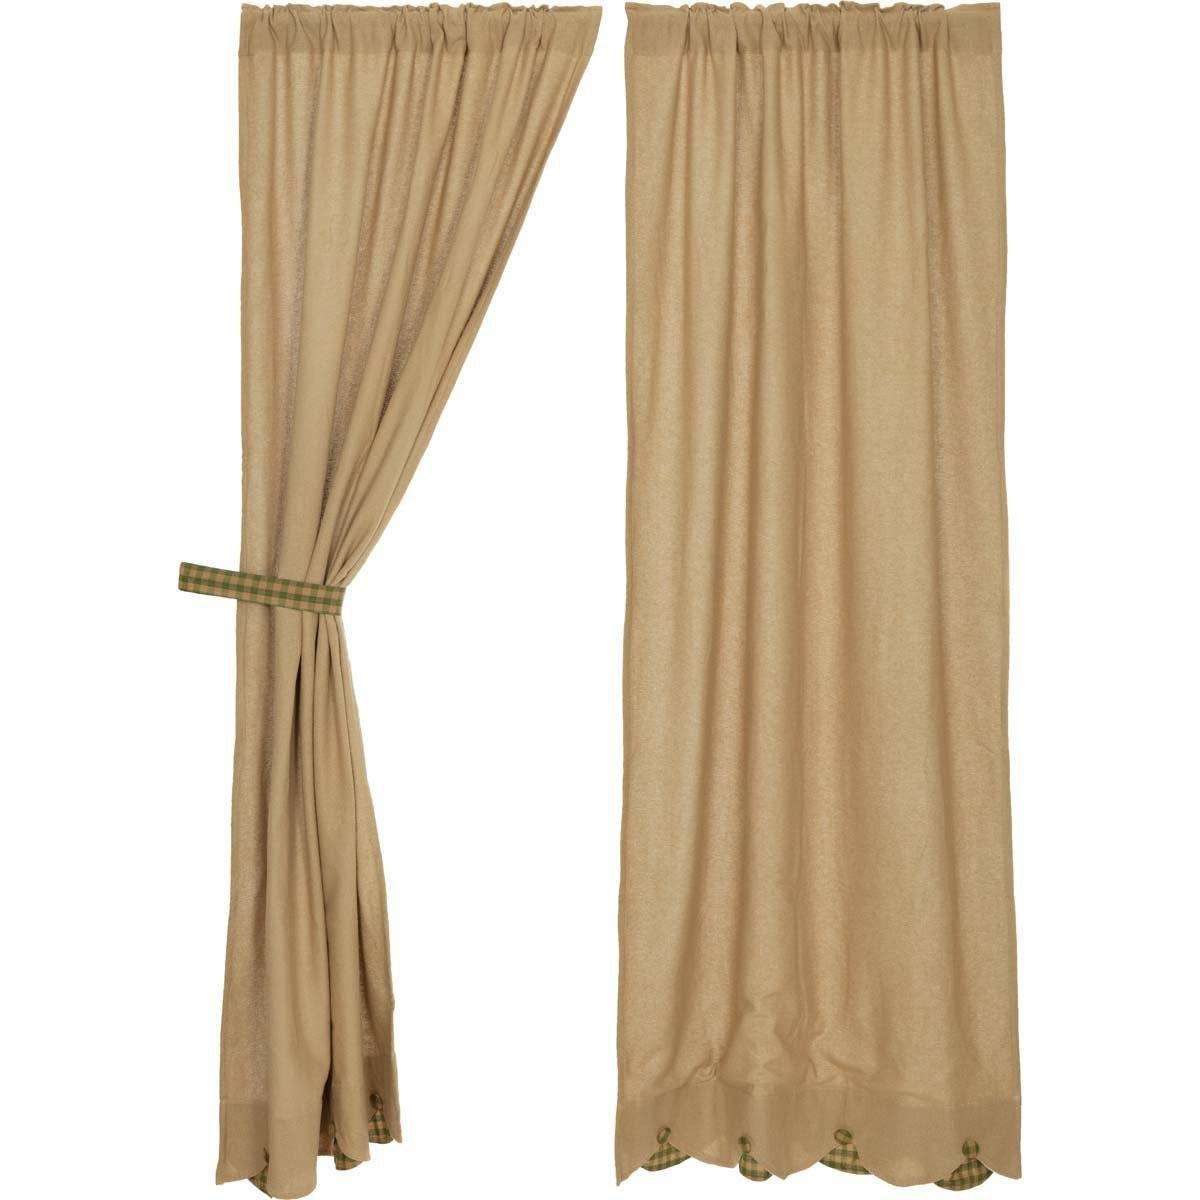 Burlap w/Green Check Scalloped Panel Curtain Set of 2 84x40 VHC Brands - The Fox Decor